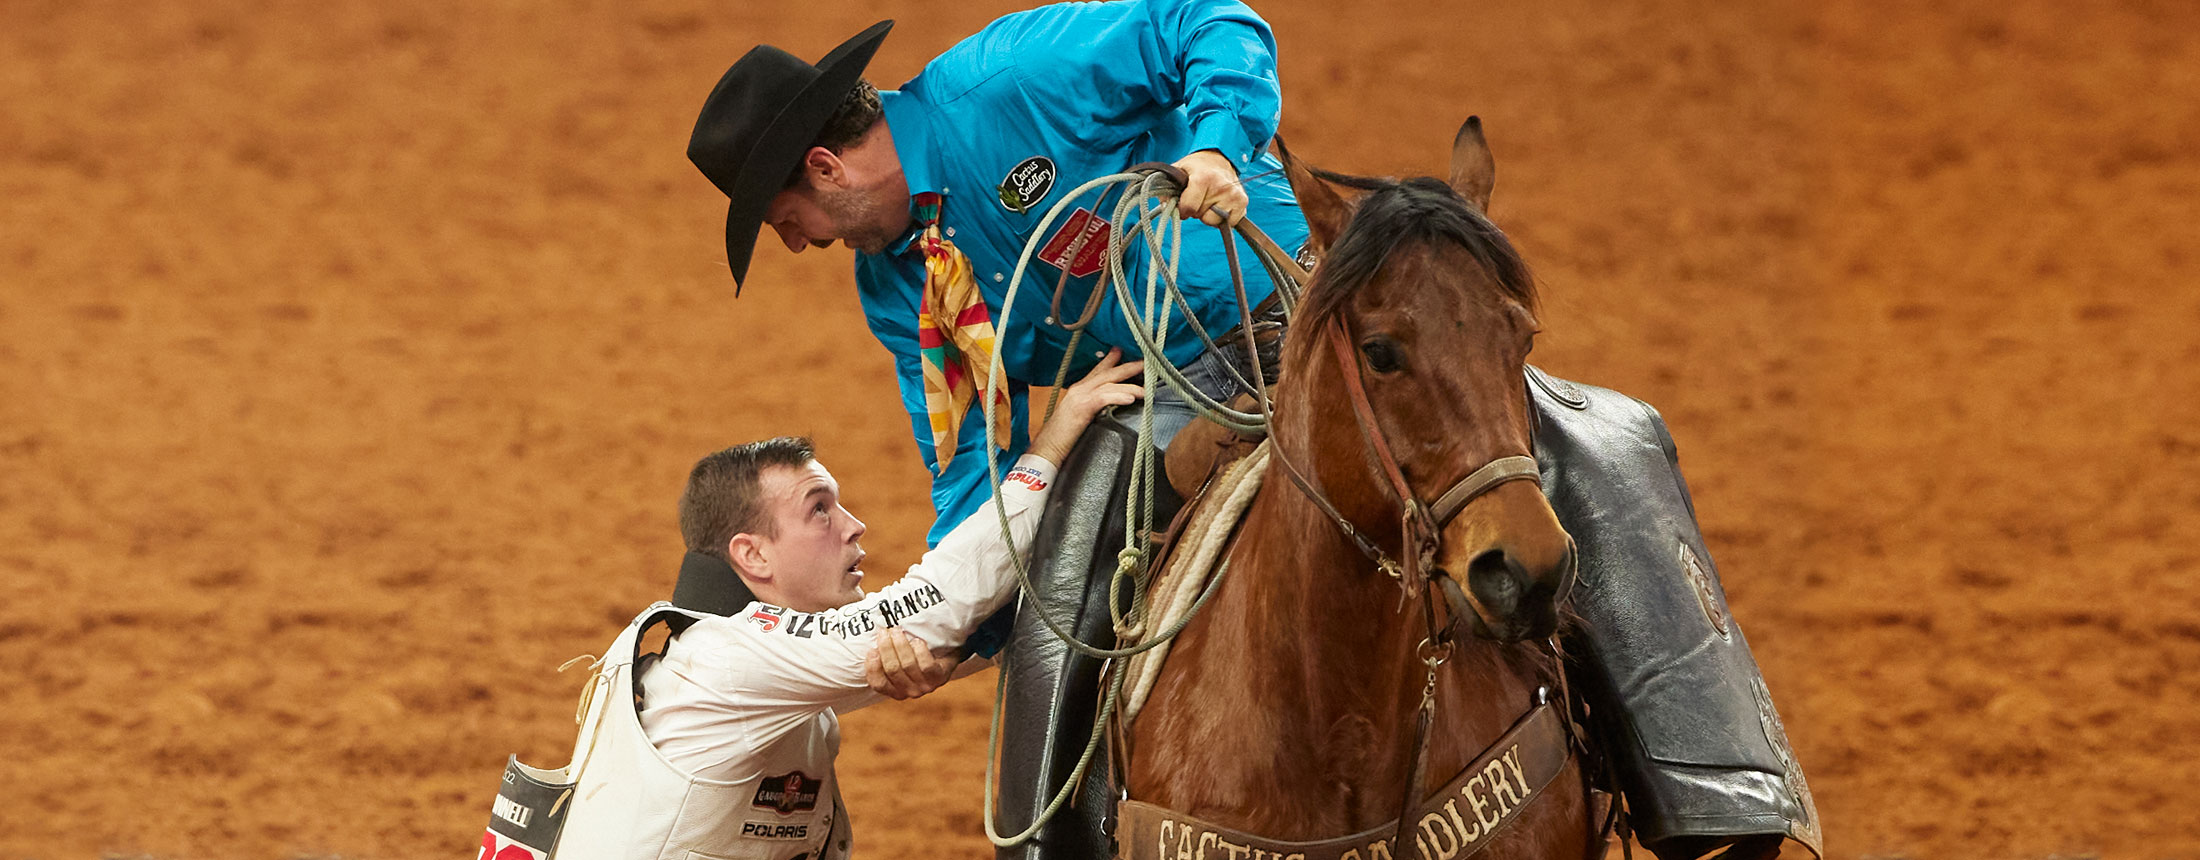 A pickup man is helping Tim O’Connell off his horse at the rodeo.